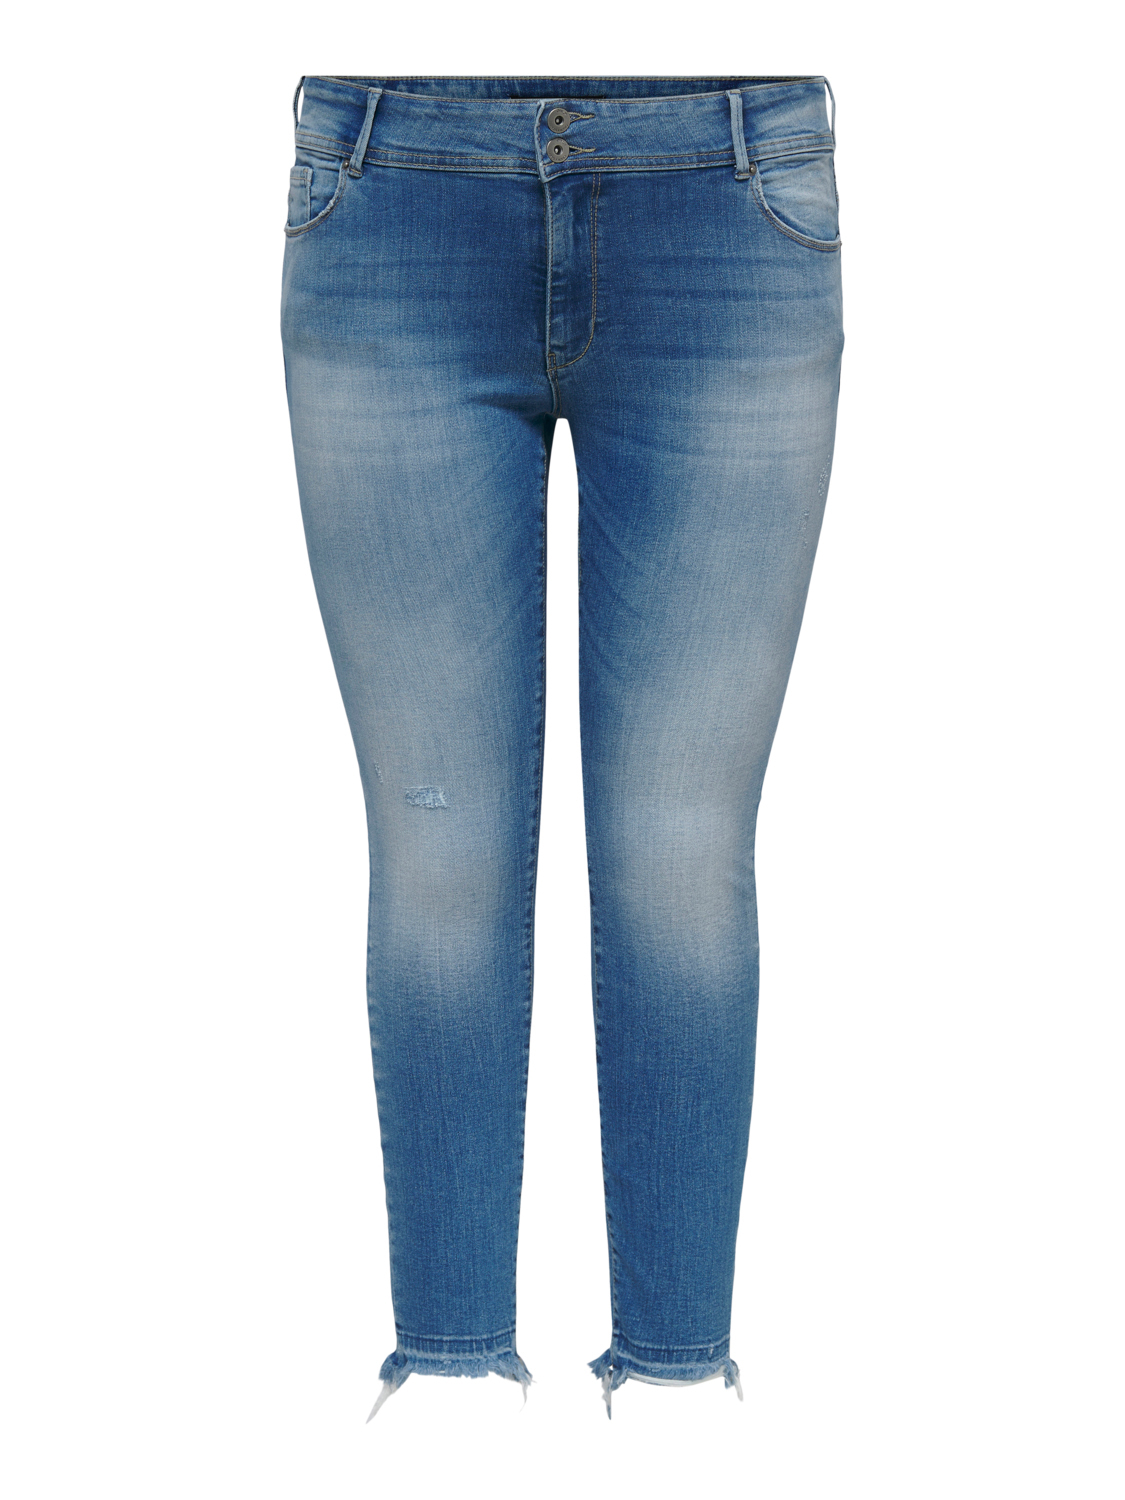 Only Carcarma Regular Fit Skinny Jeans - Michelle's